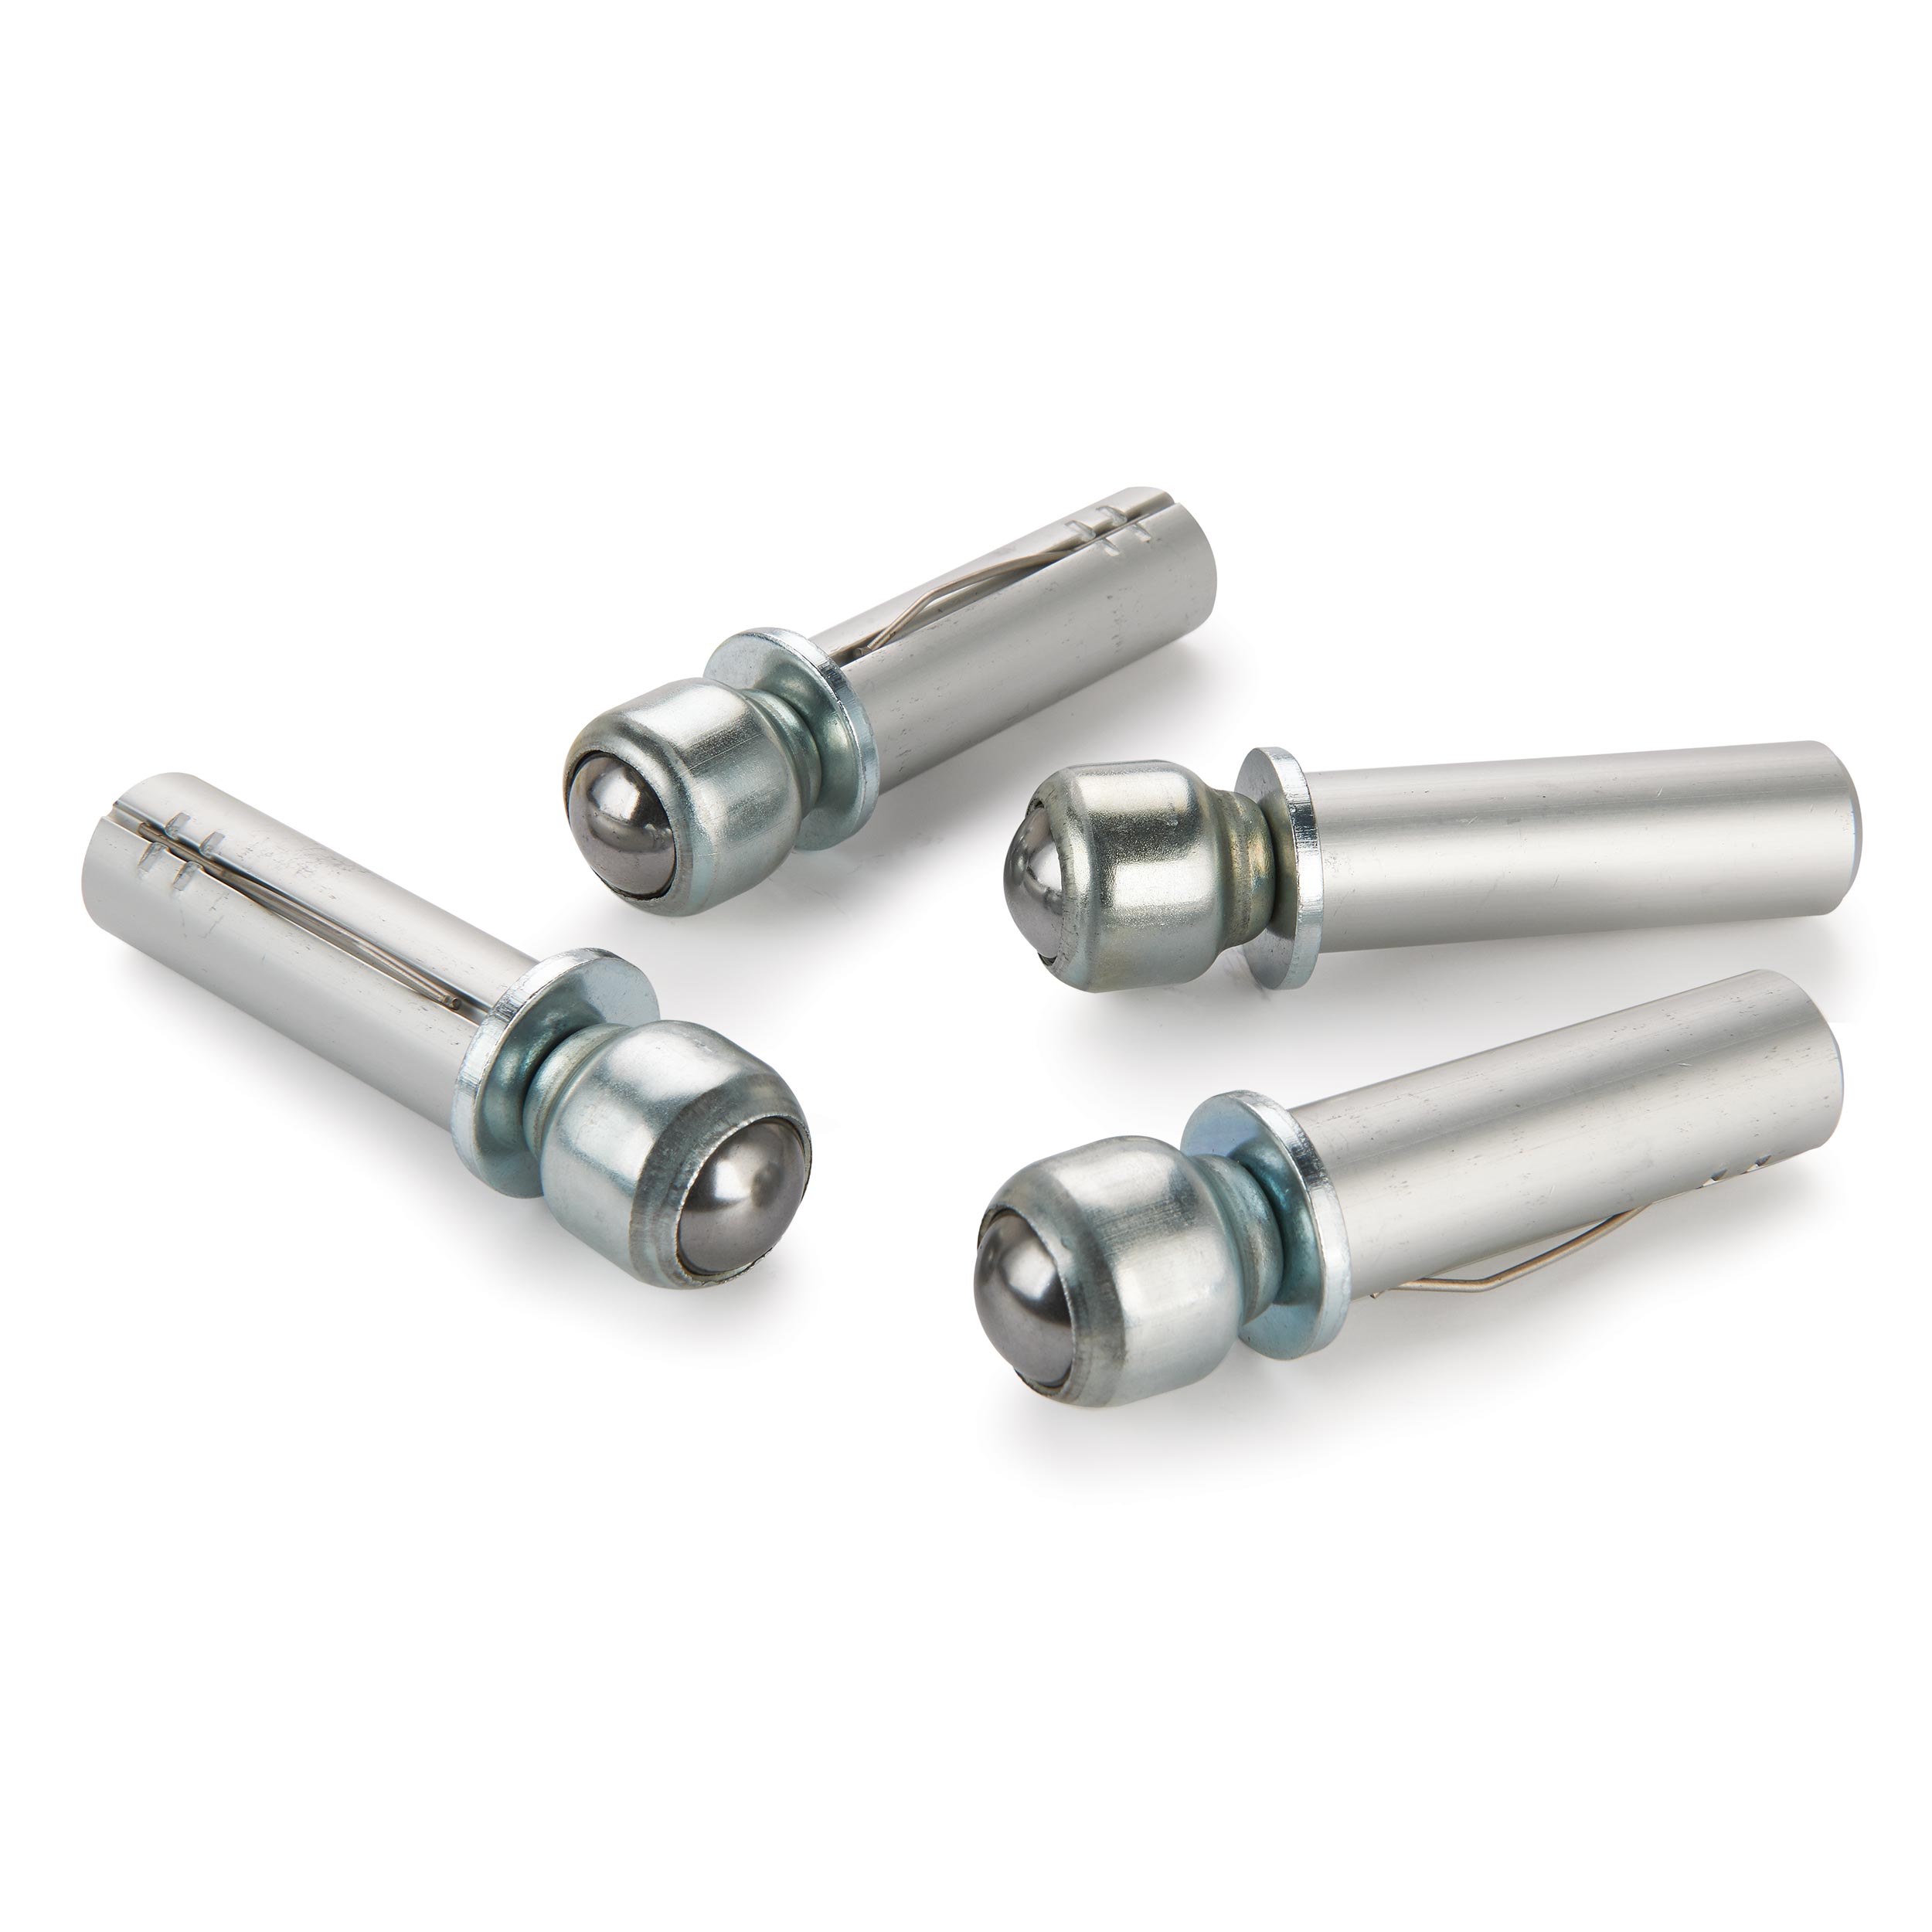 4-piece 3/4" Bench Dog Rollerball Guides